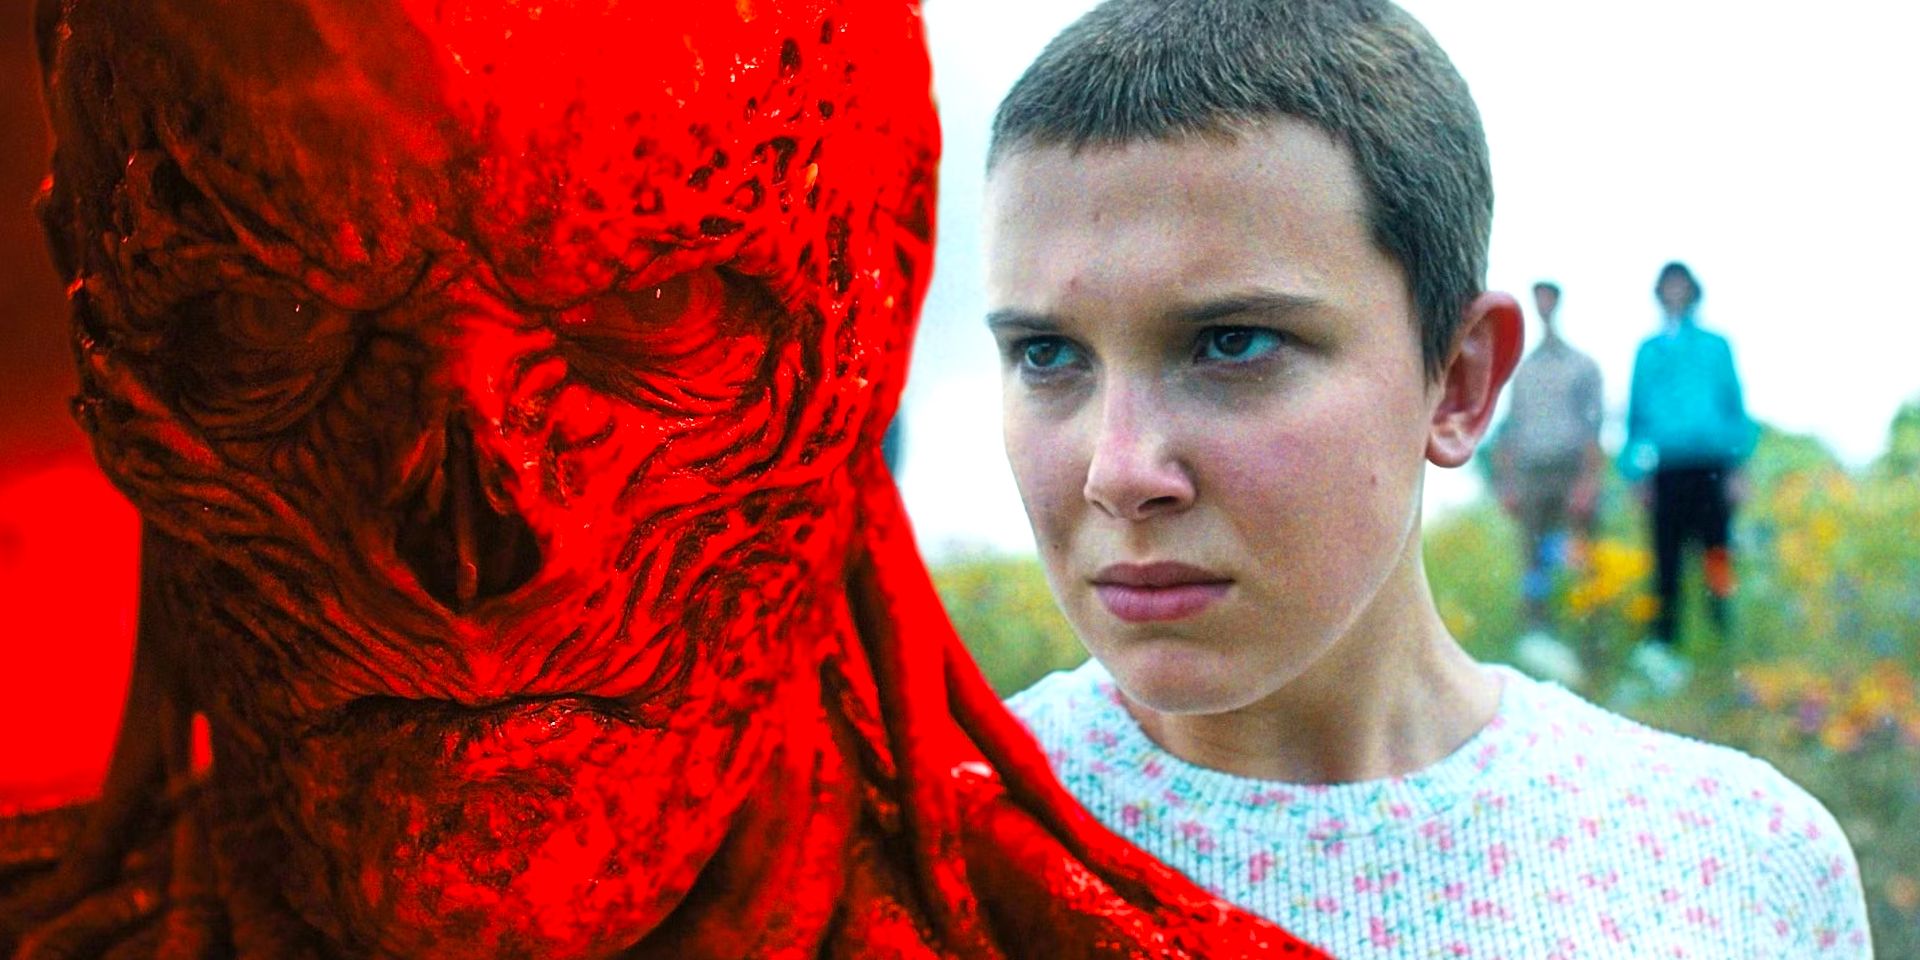 Vecna red and looking angry and Eleven looking determined in Stranger Things season 4.